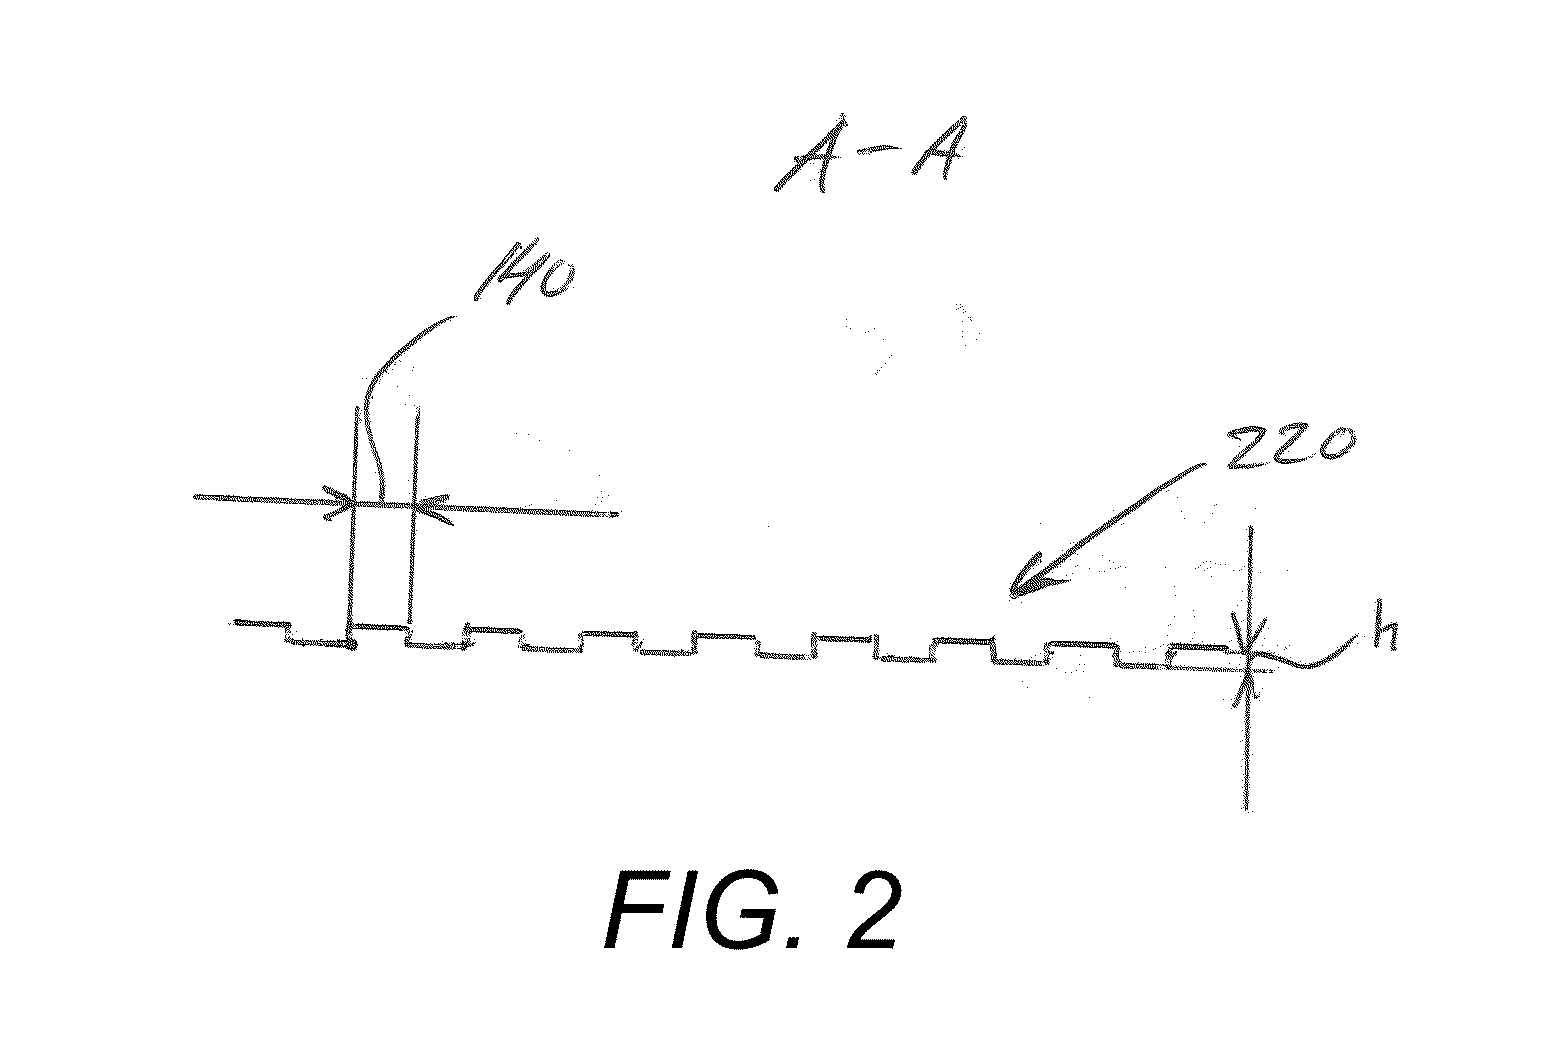 Method for improved material properties in additive manufacturing